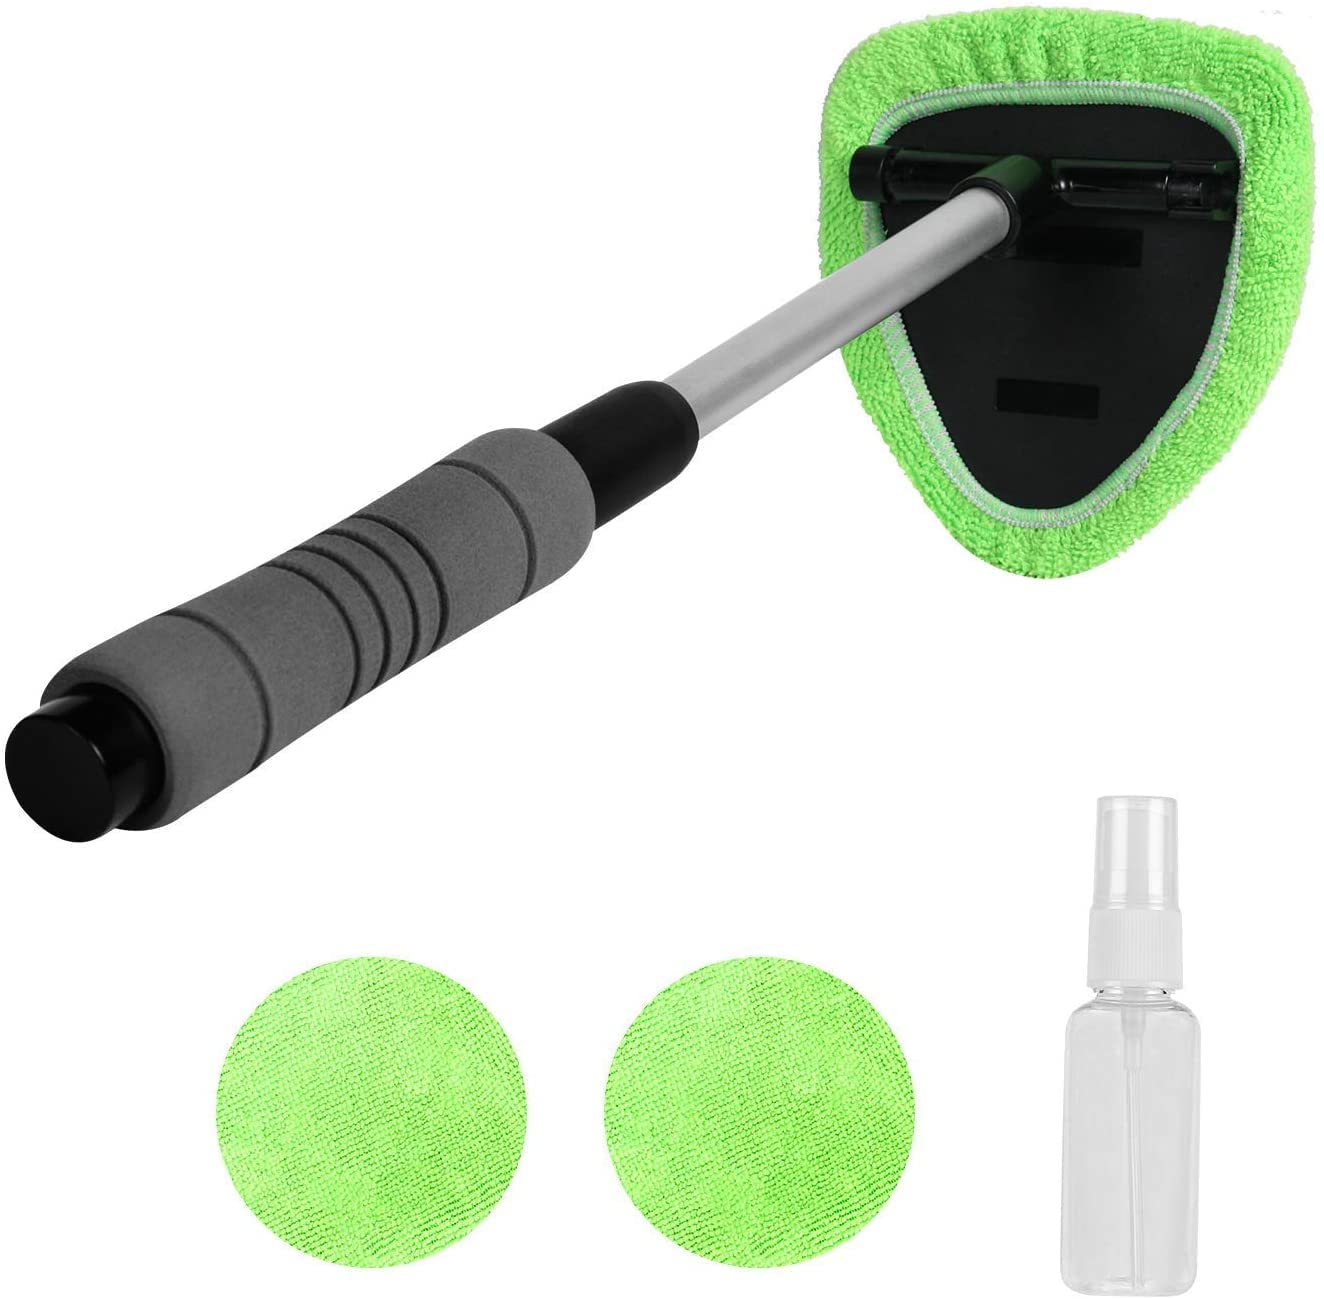 Book Cover X XINDELL Windshield Cleaner -Microfiber Car Window Cleaning Tool with Extendable Handle and Washable Reusable Cloth Pad Head Auto Interior Exterior Glass Wiper Car Glass Cleaner Kit (Extendable) Green